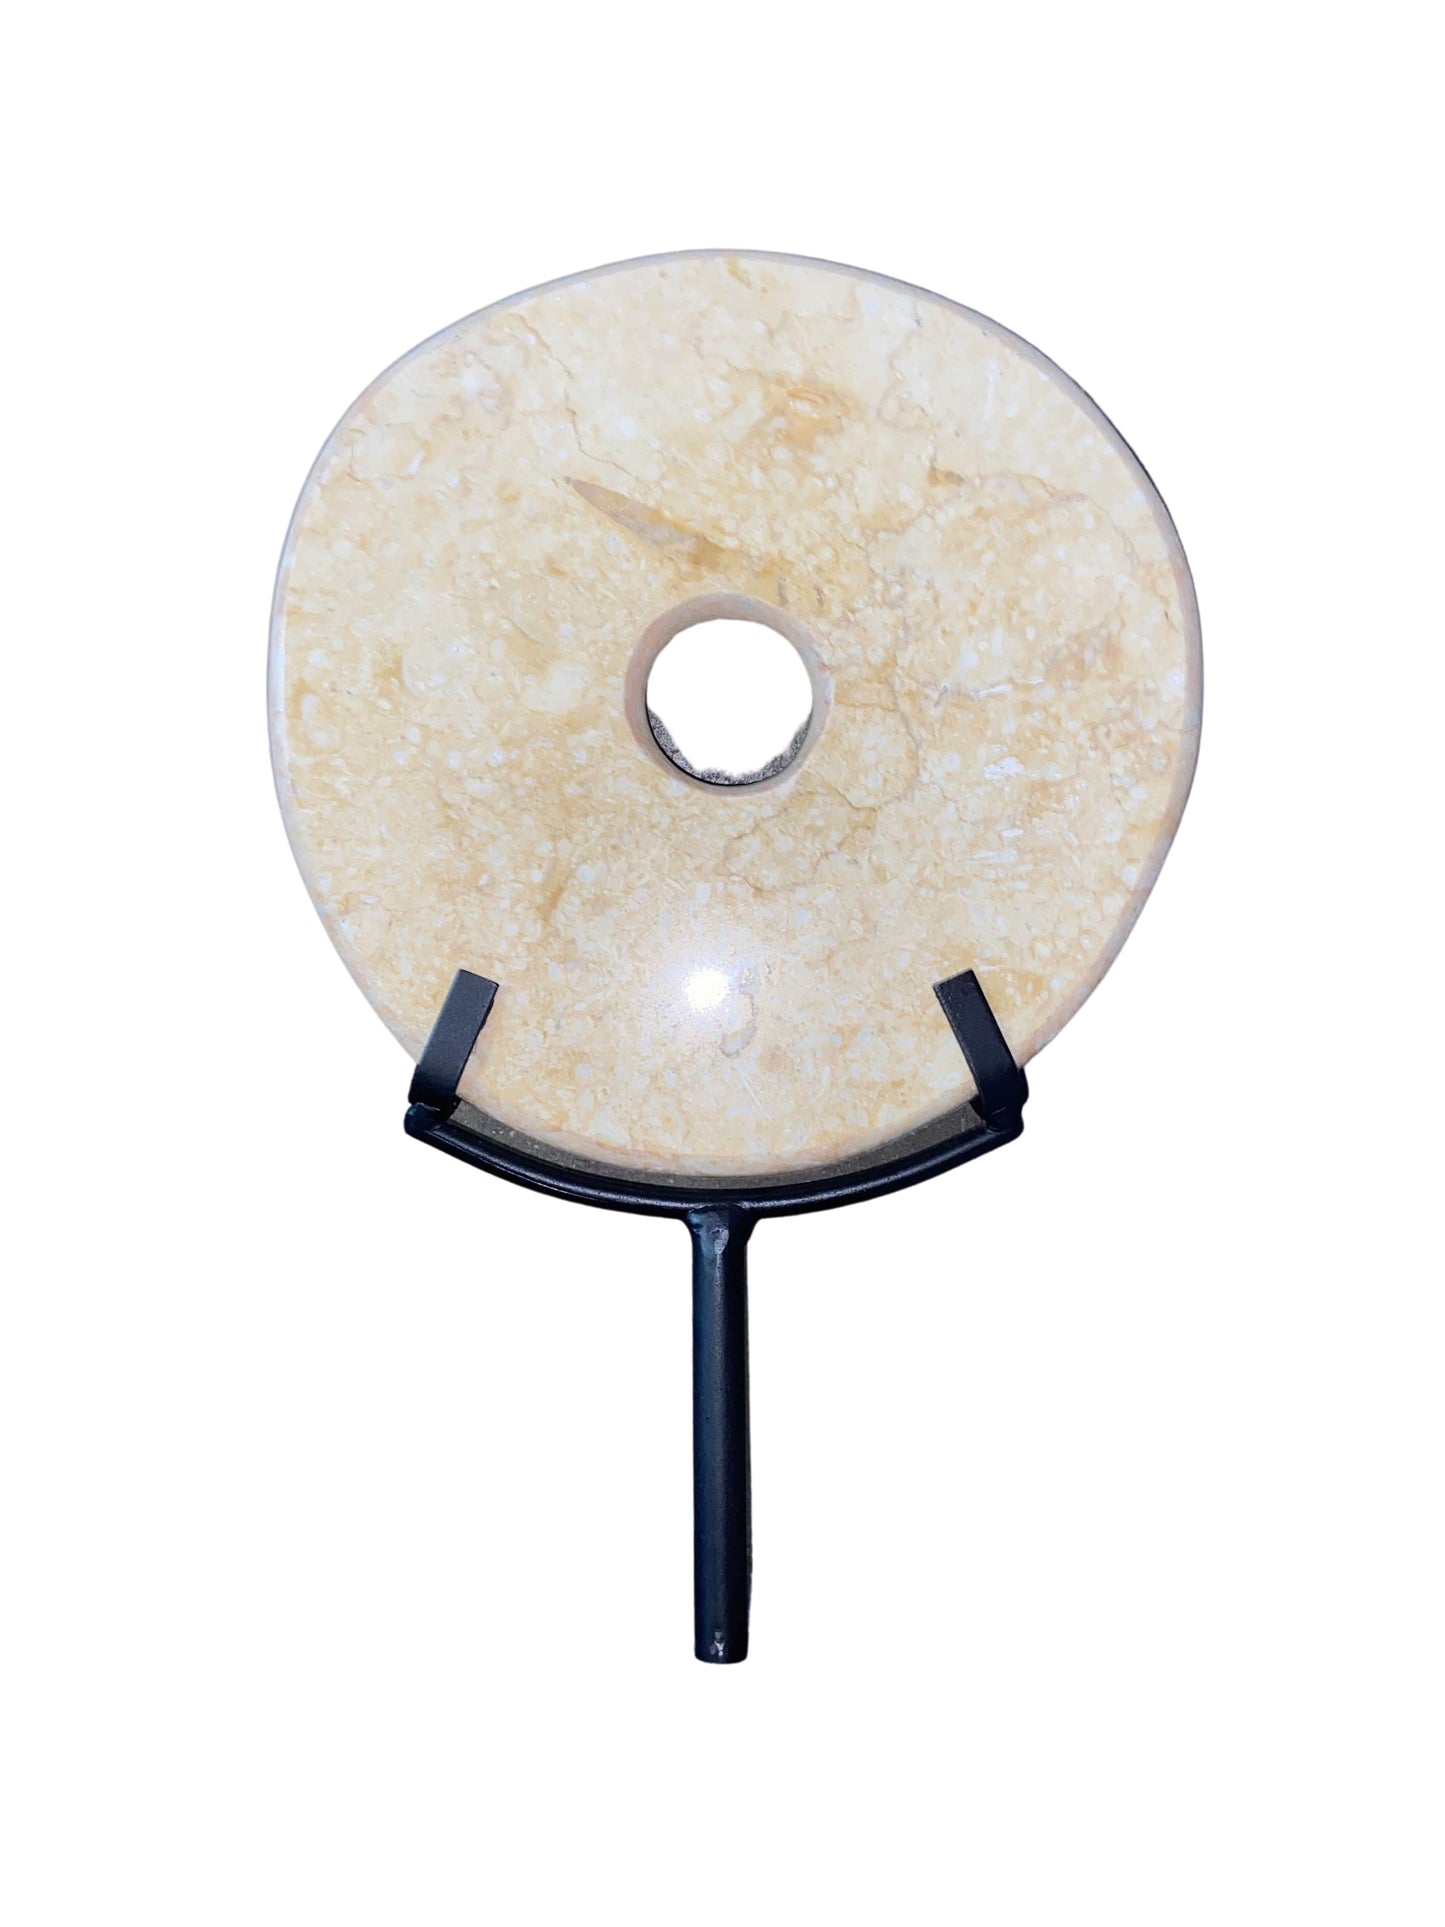 SILICON VALLEY: Gavin Belson's Small Marble Disk on Stand